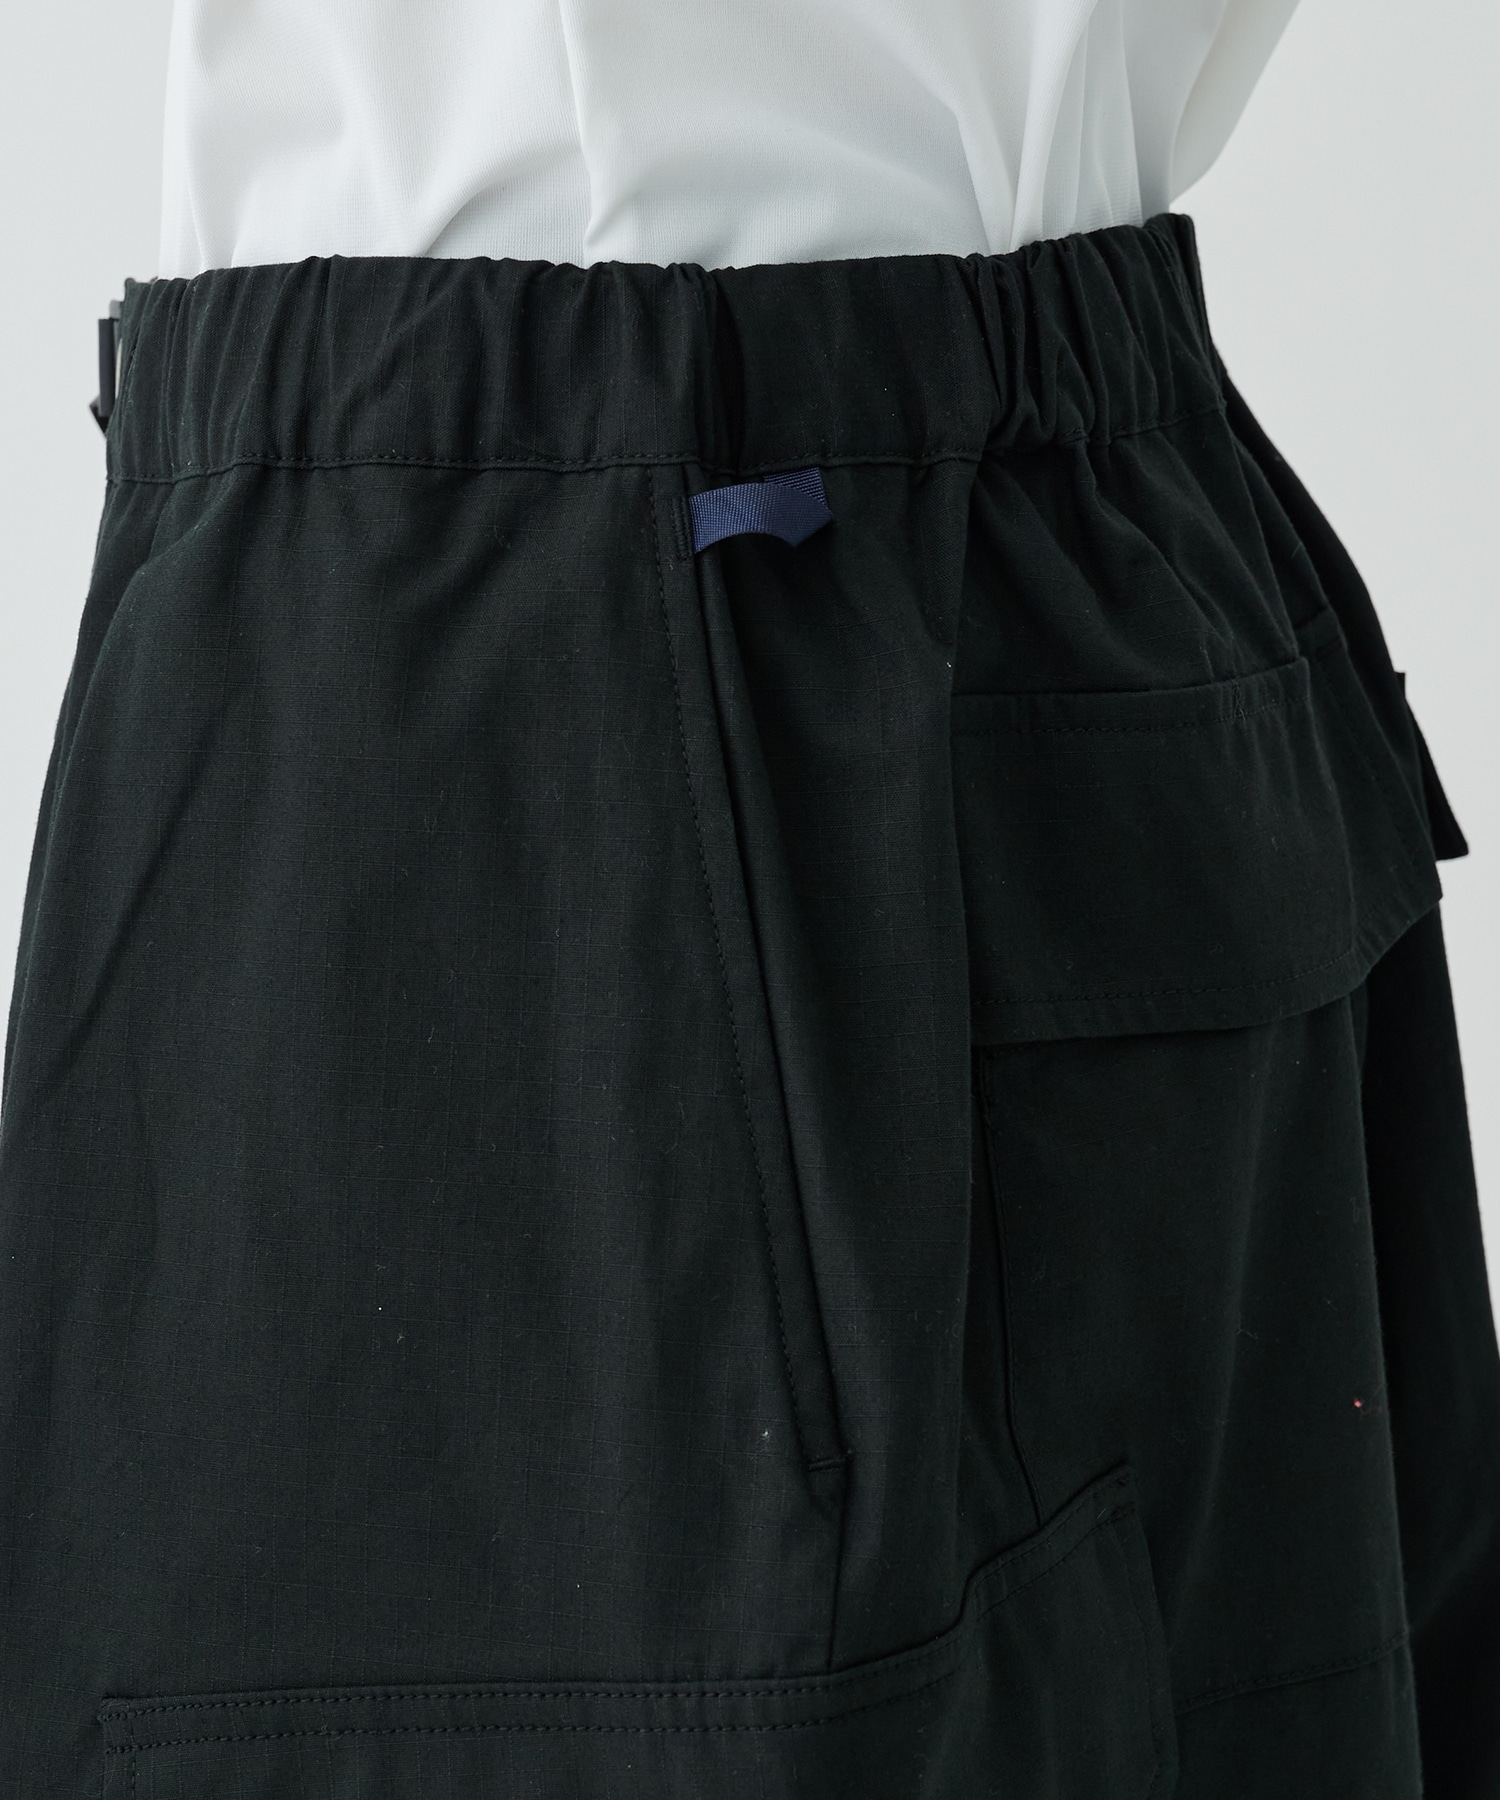 THE CHANGING LENGTH FATIGUE PANTS POLIQUANT